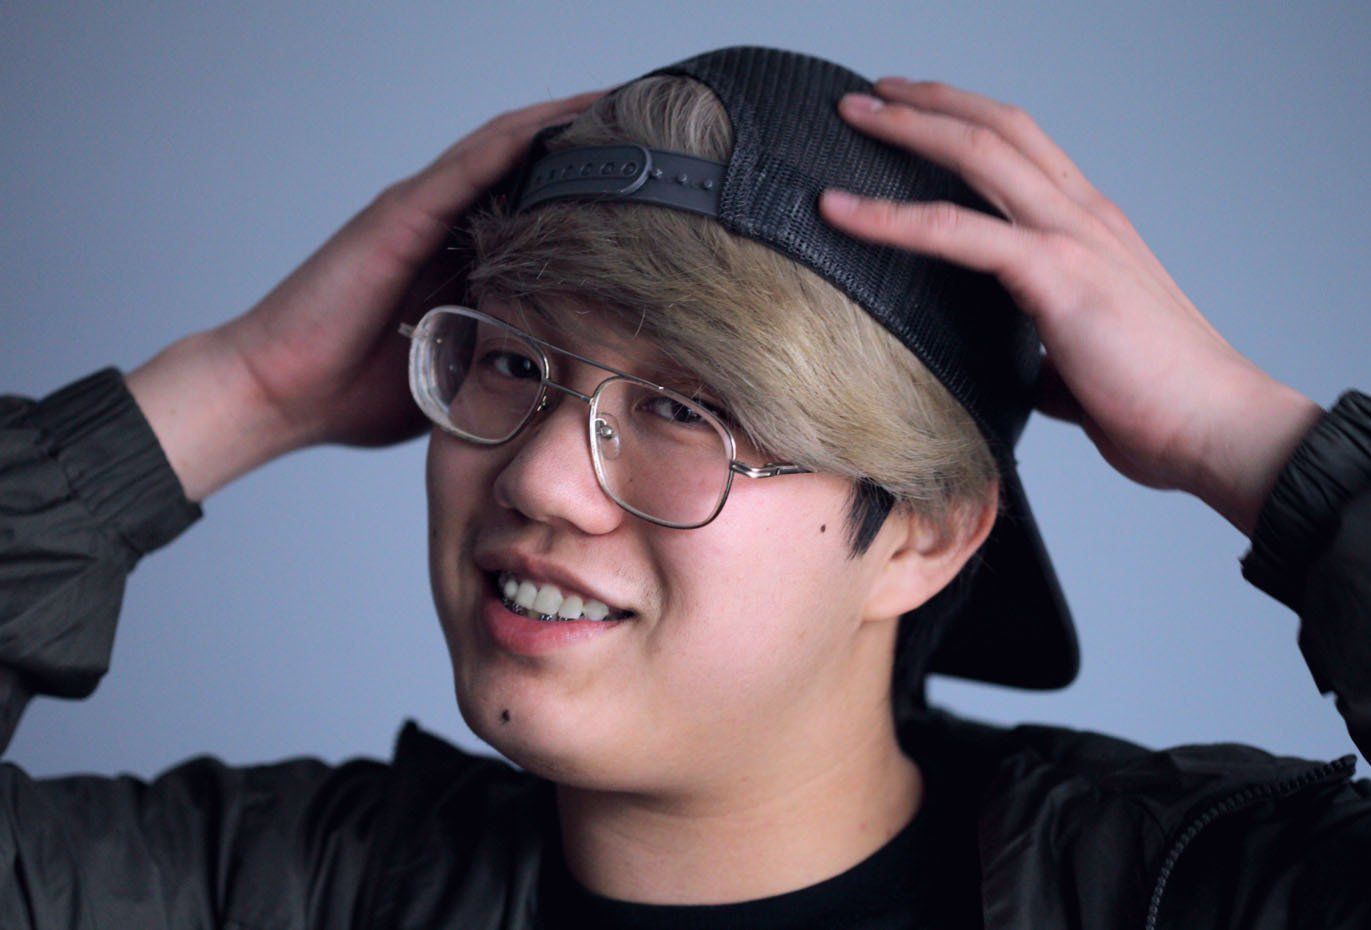 A young man wearing glasses and a hat is smiling